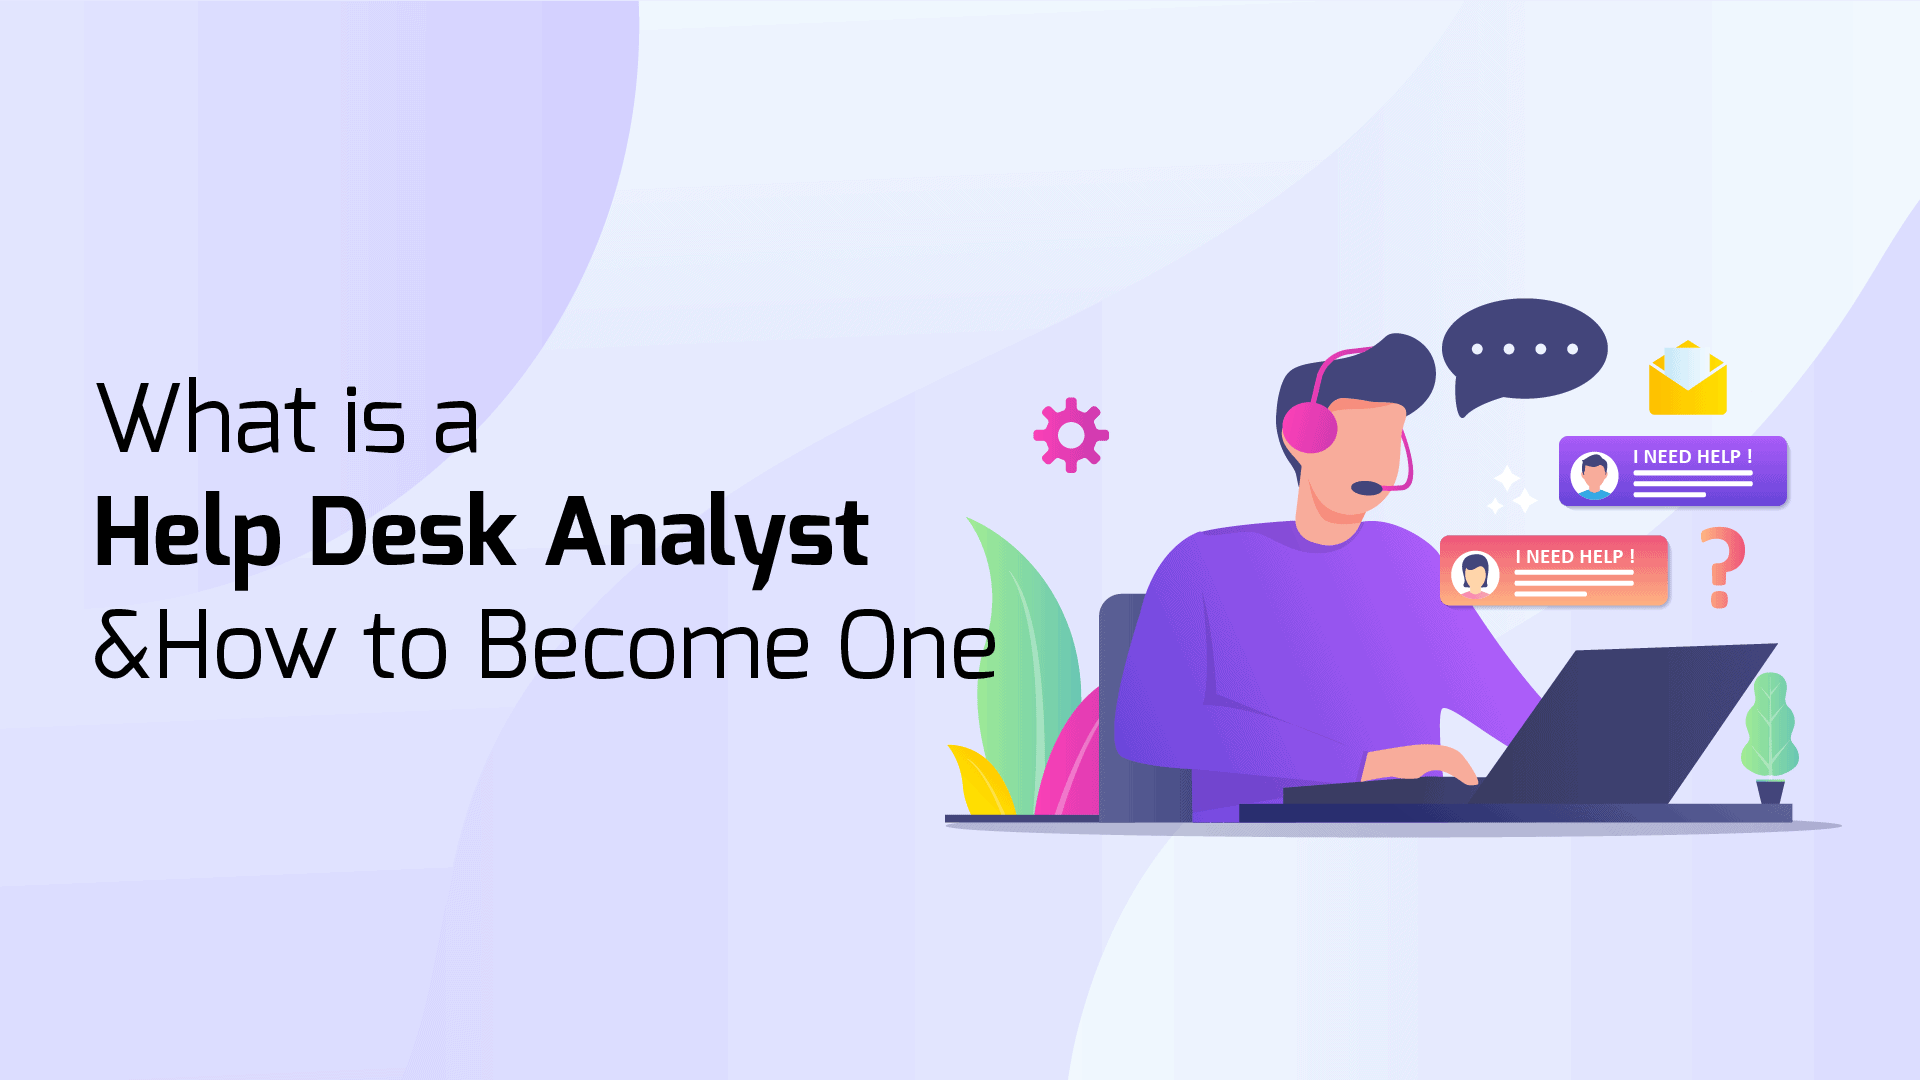 What is a Help Desk Analyst and How to Become One